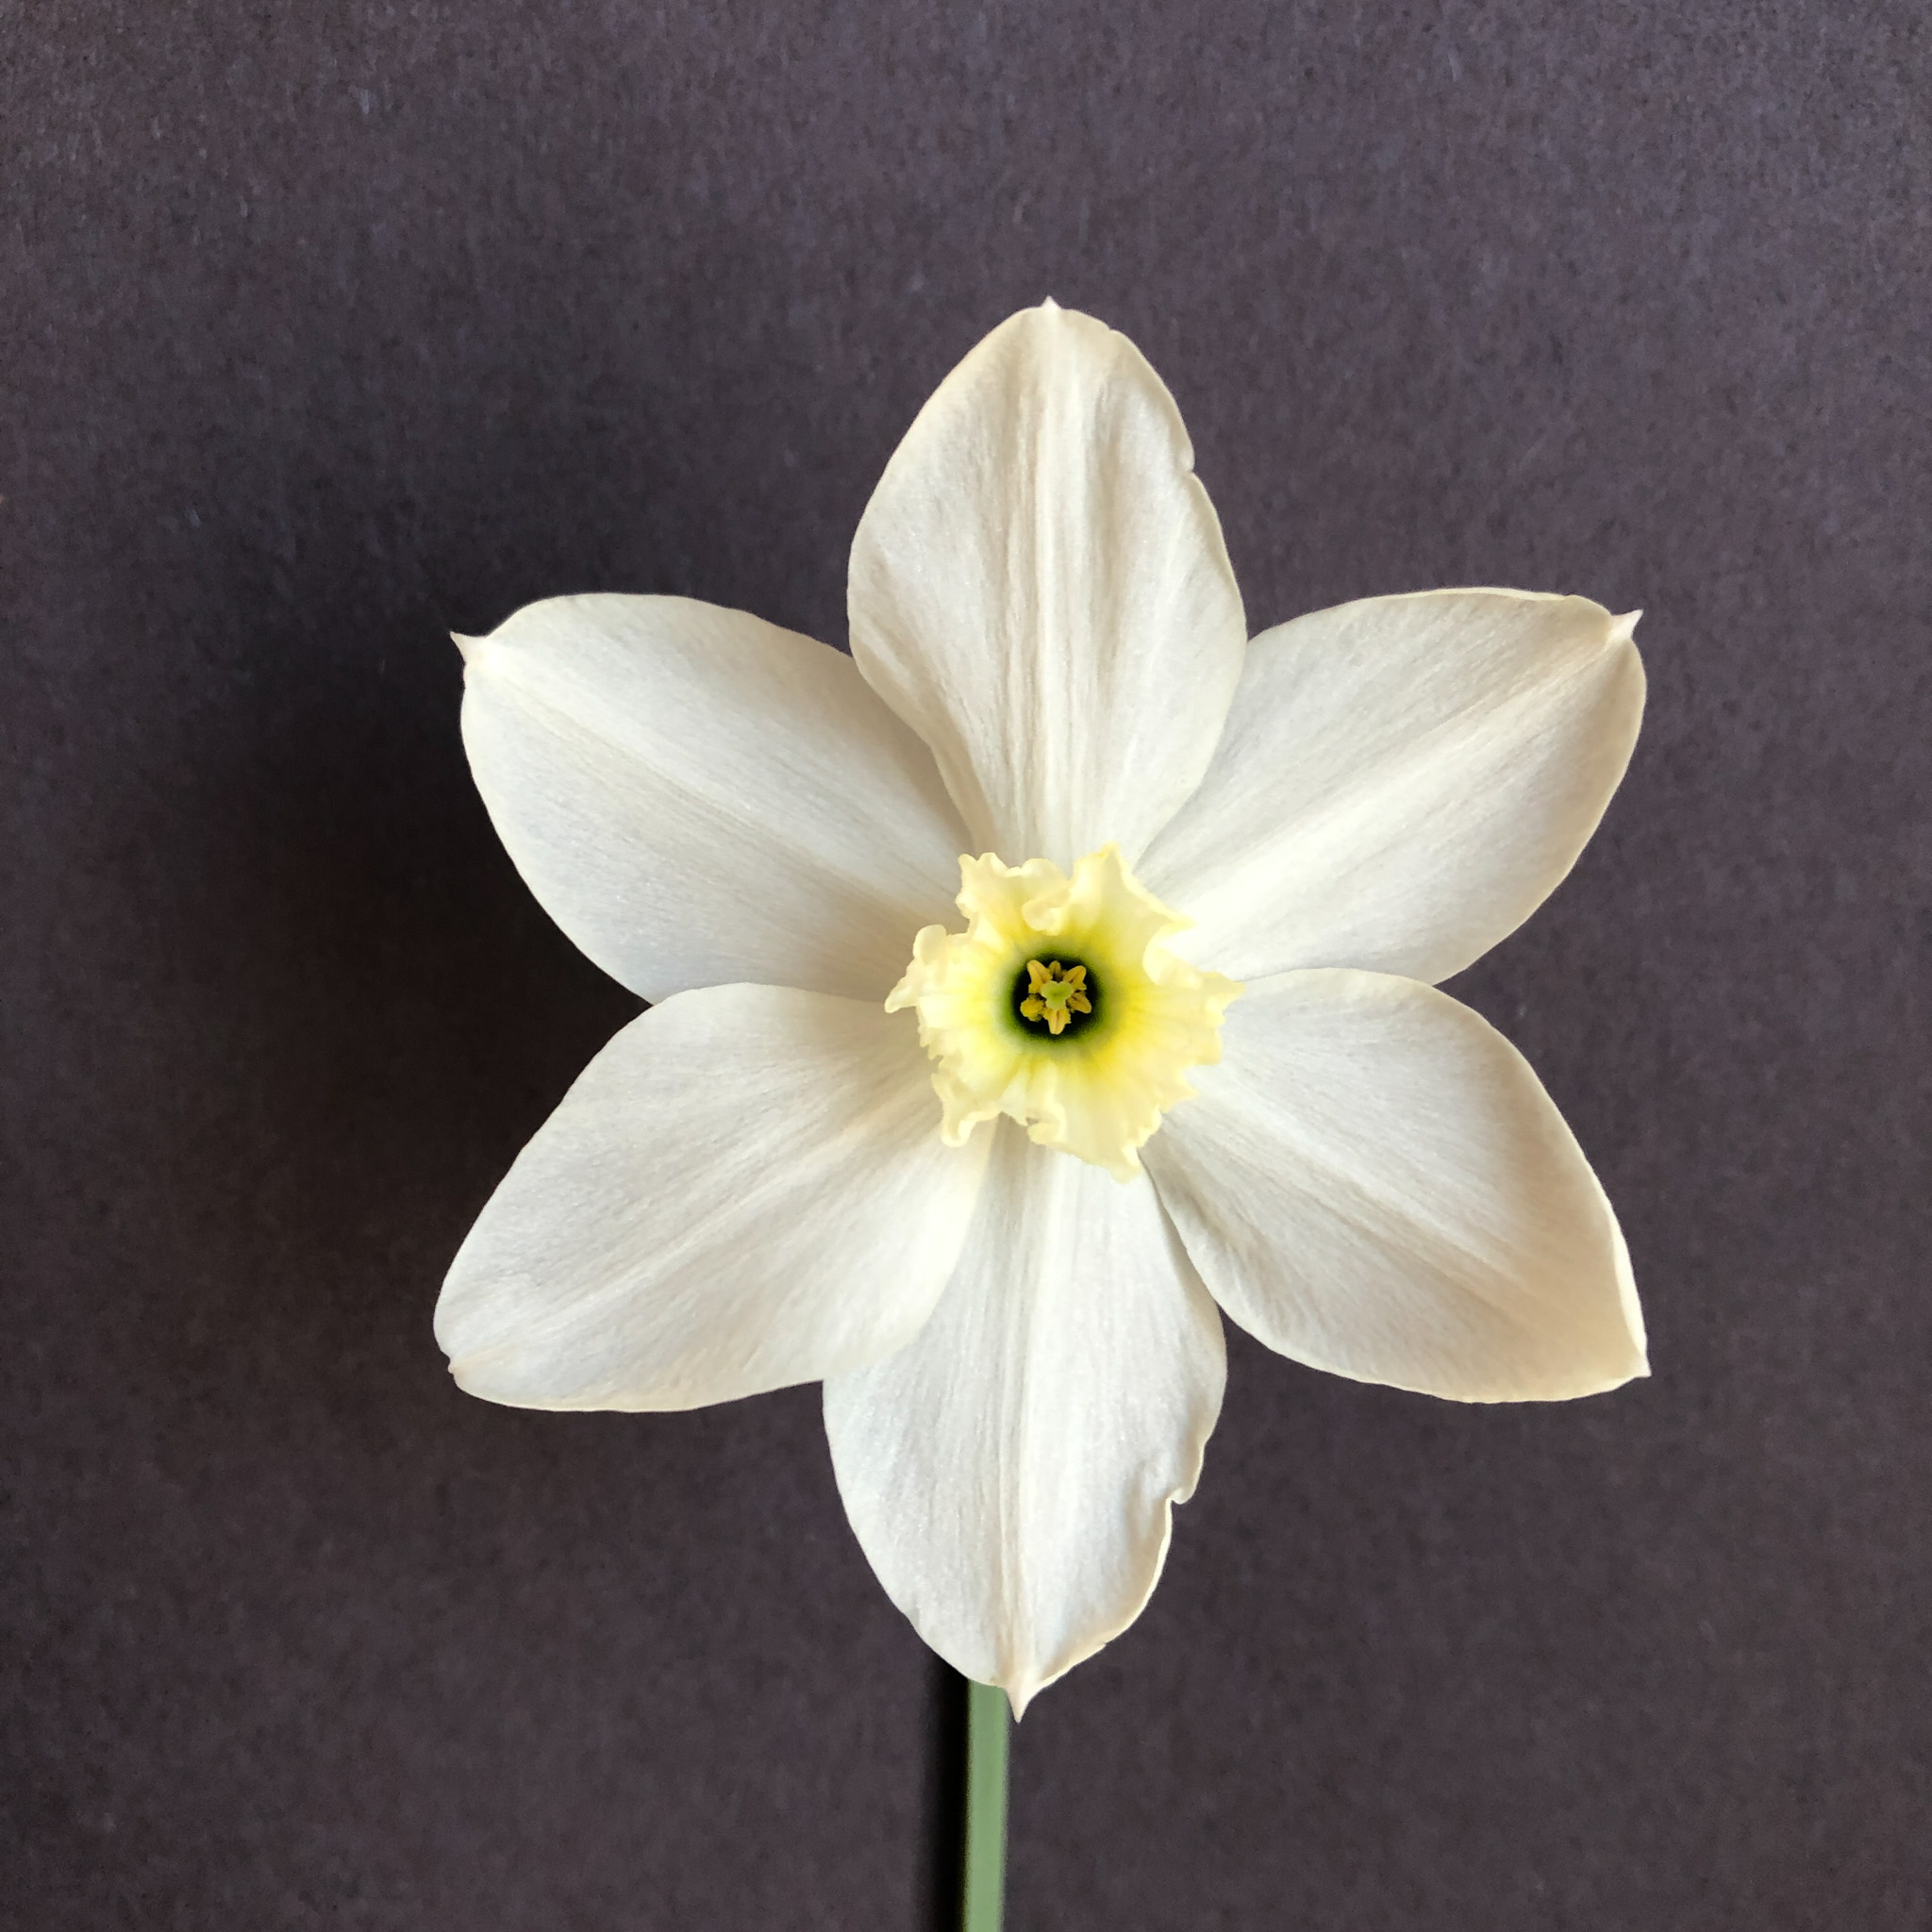 color maturation of narcissus White Lady